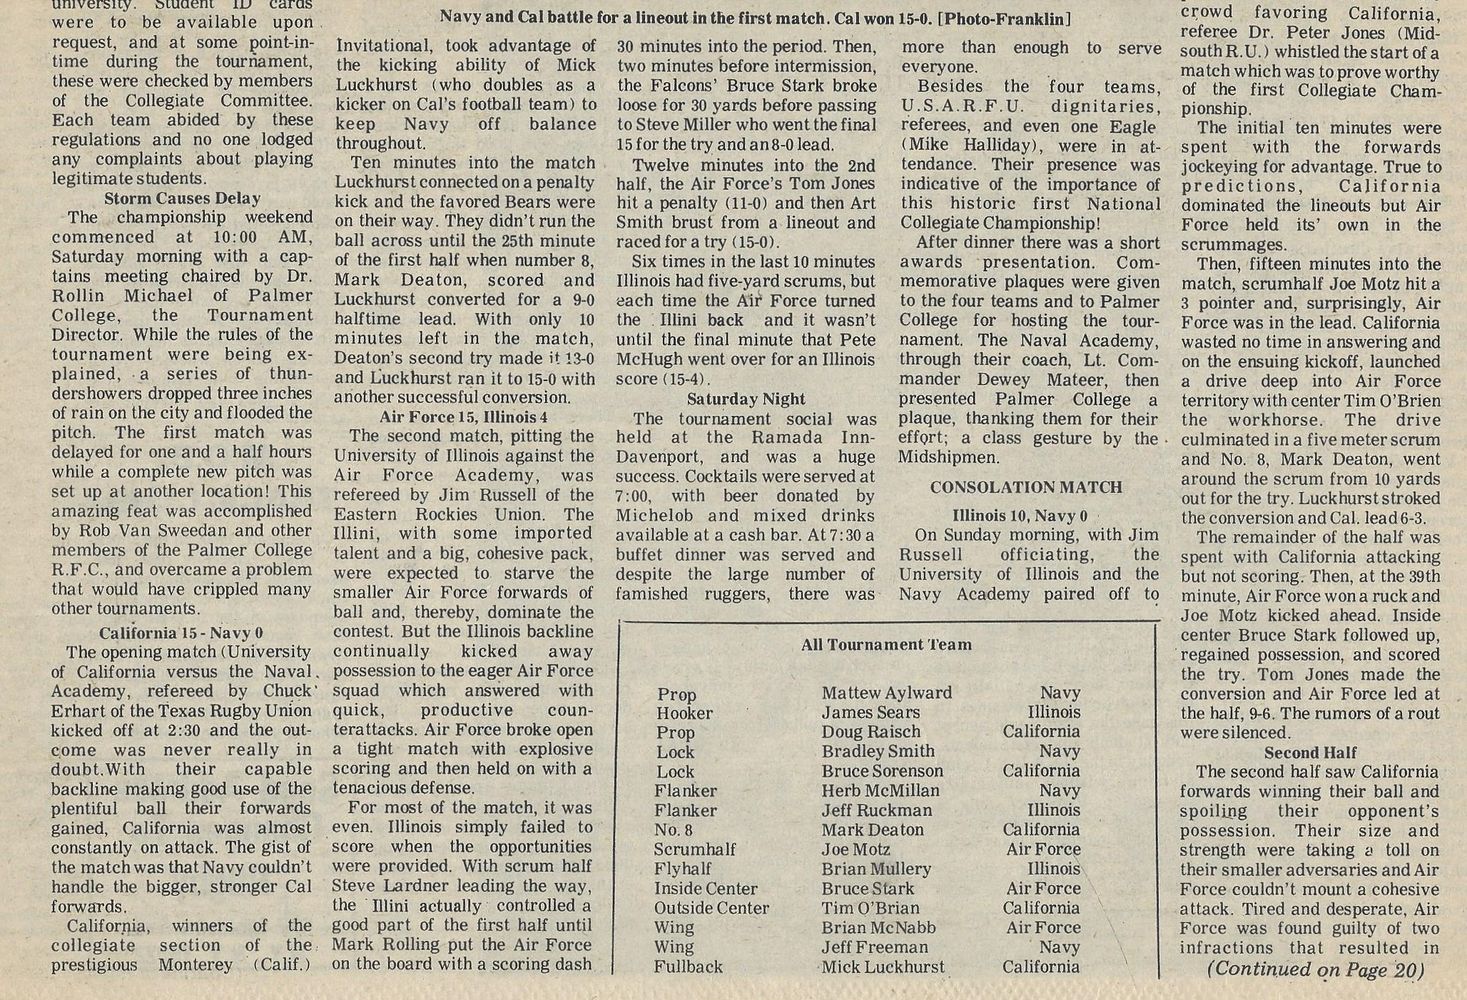 1980 rugby championship article 2.jpg